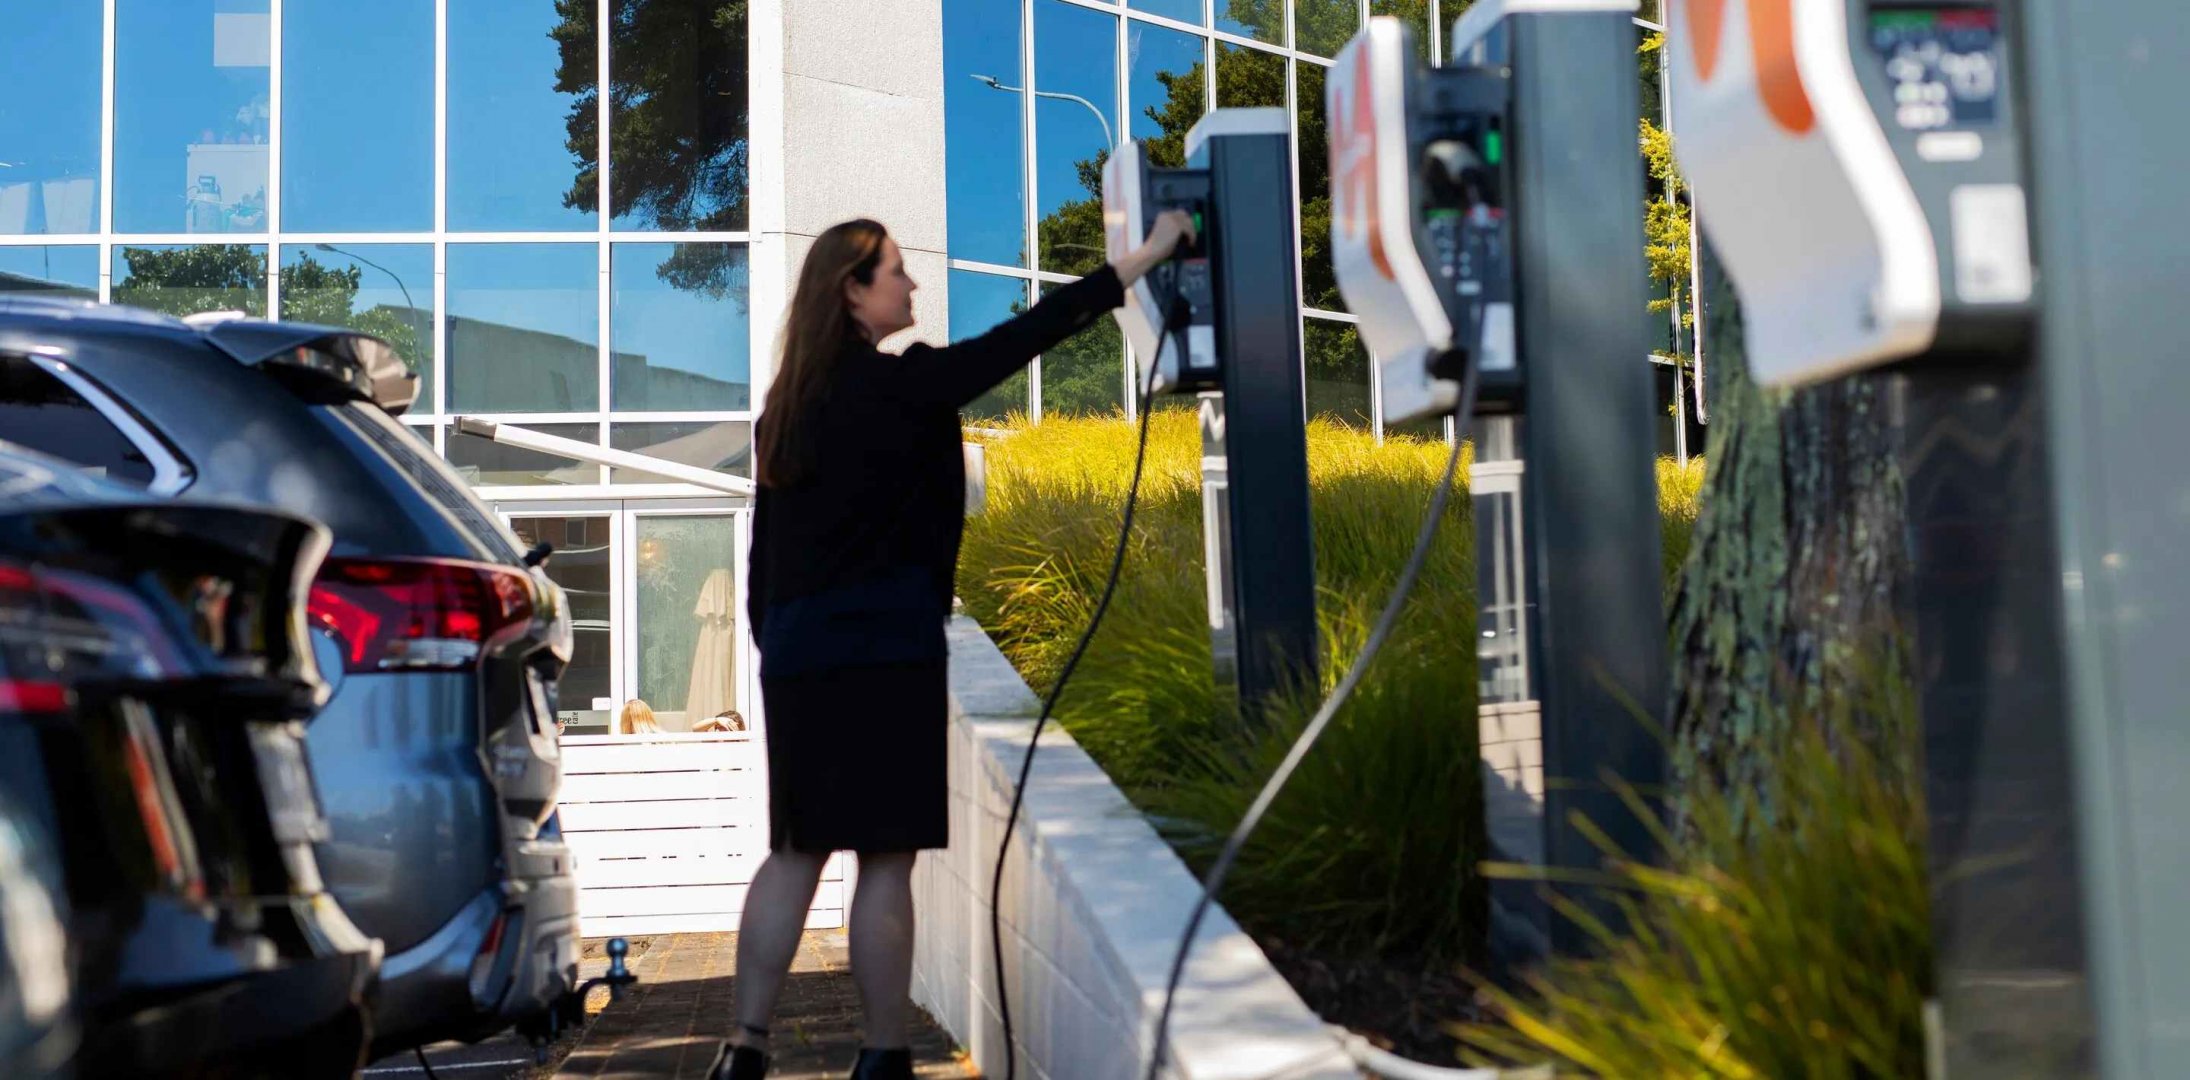 woman picking up plug from charging station.jpg